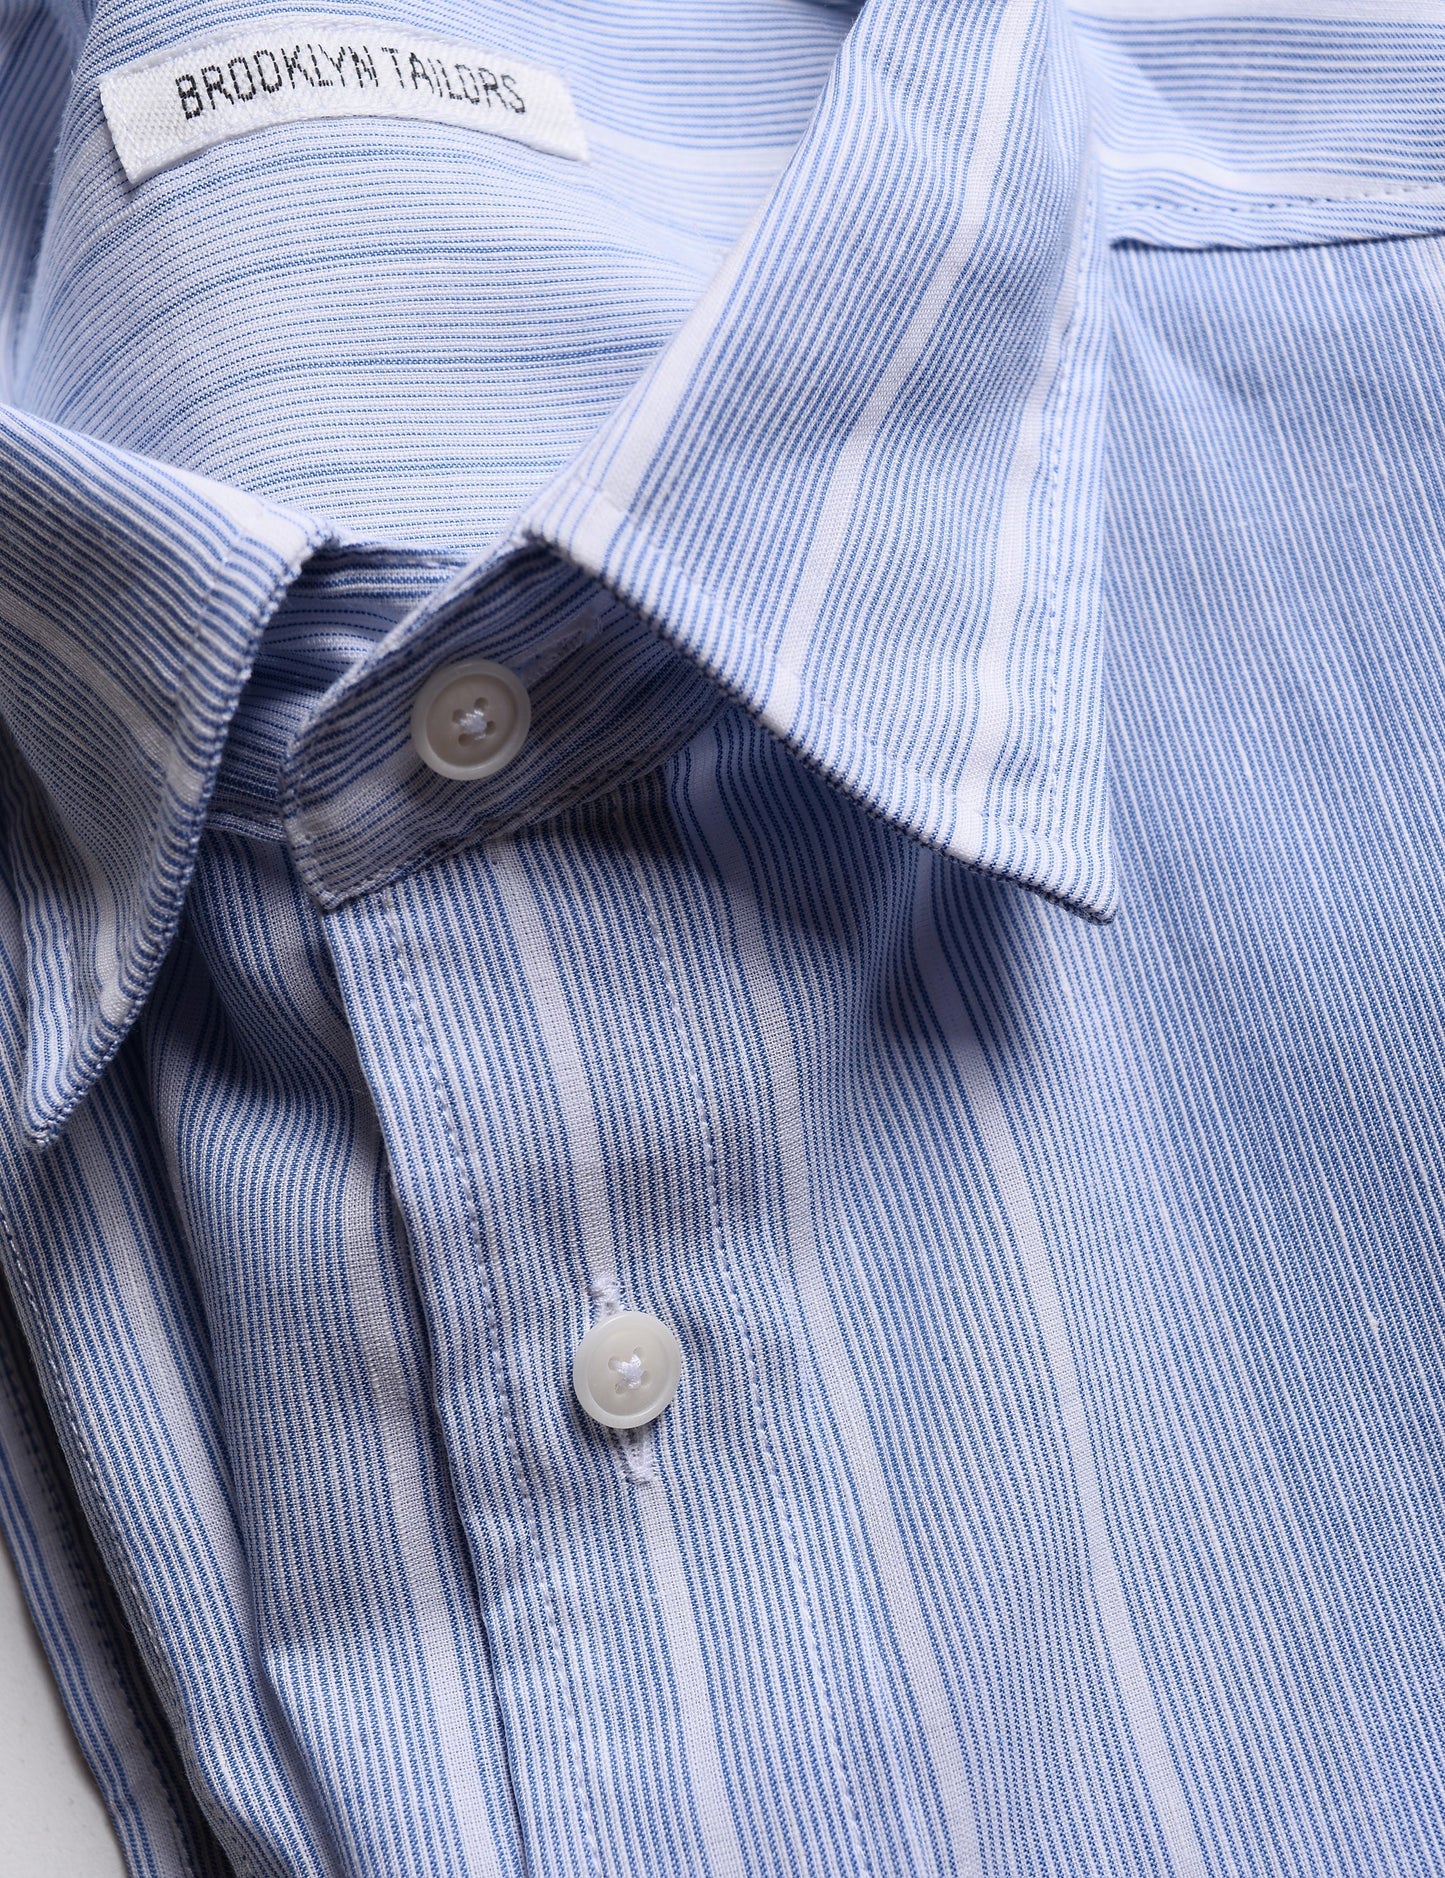 Detail of collar and buttons on Brooklyn Tailors BKT14 Casual Shirt in Beach Stripe - Big Sky